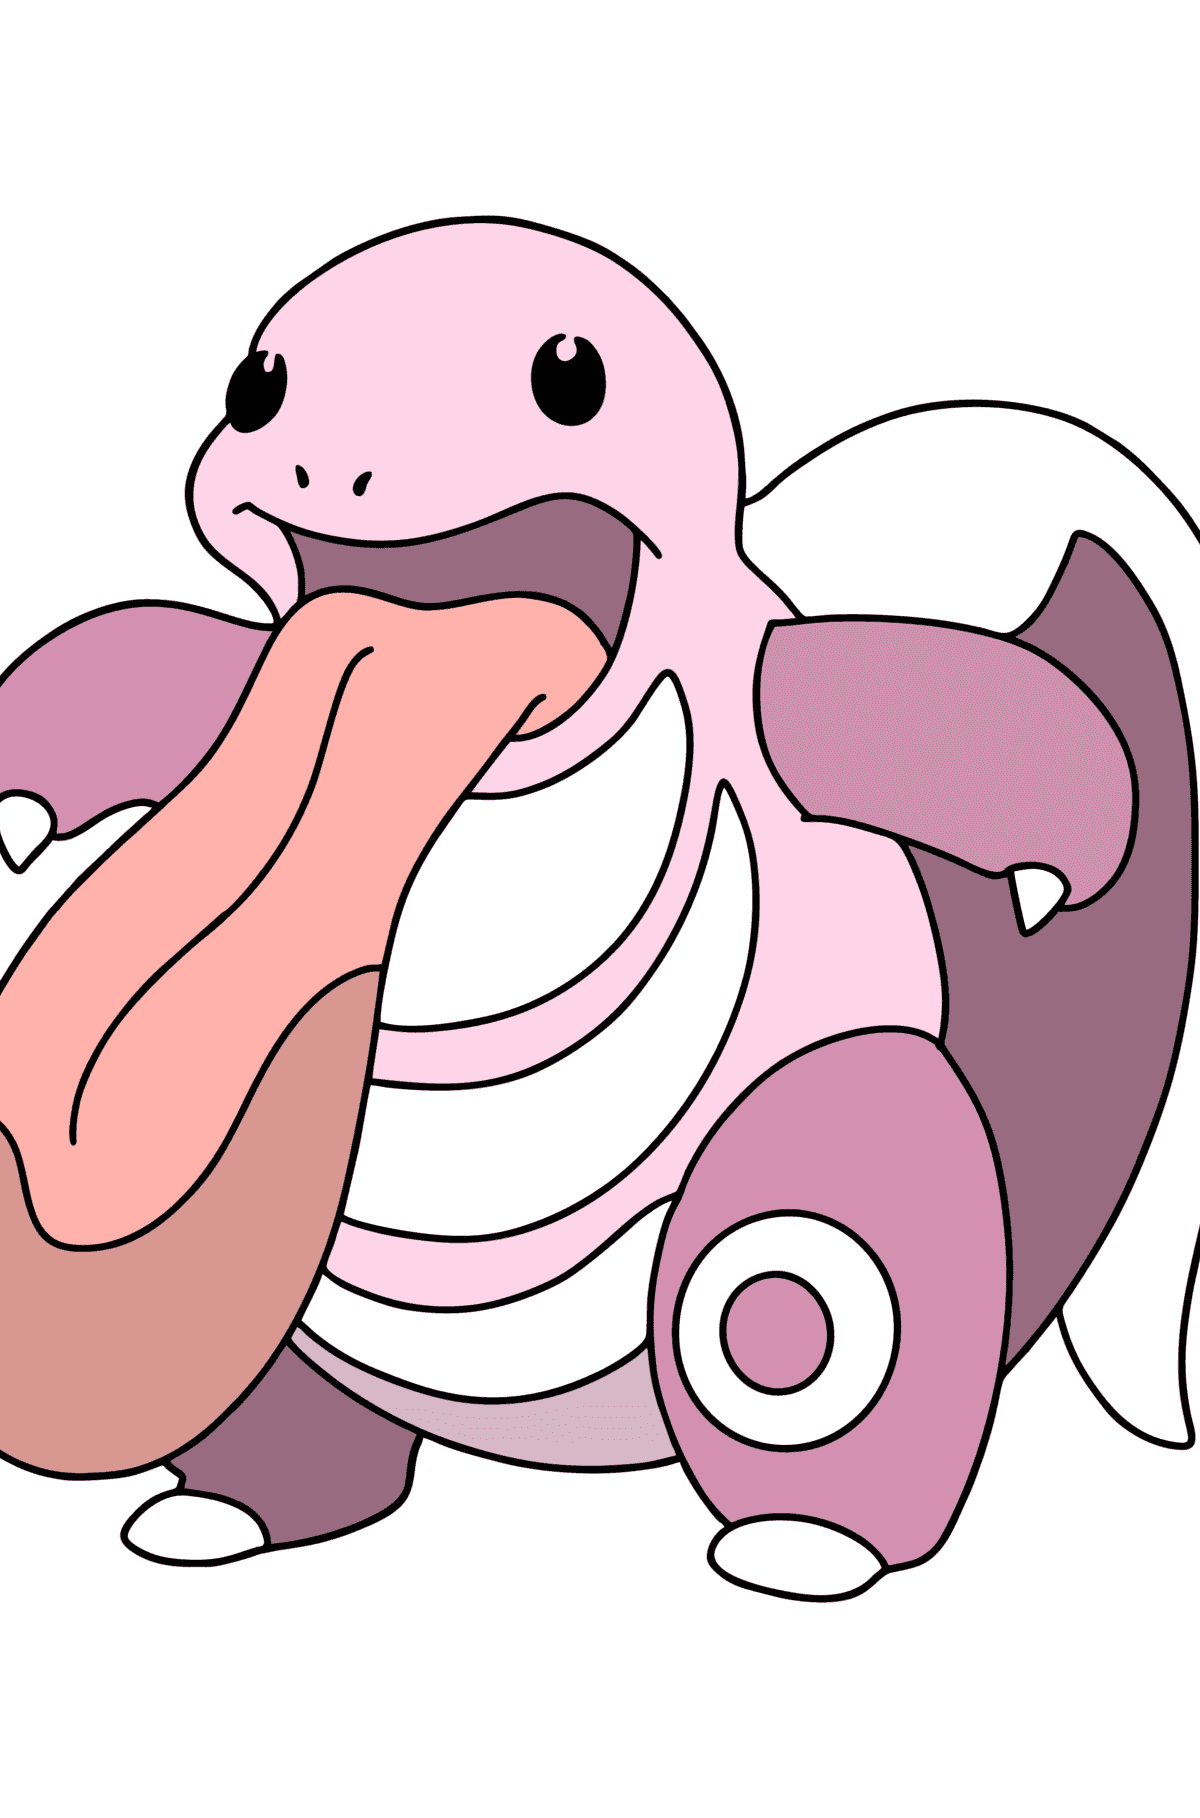 Coloring page Pokemon Go Licking - Coloring Pages for Kids